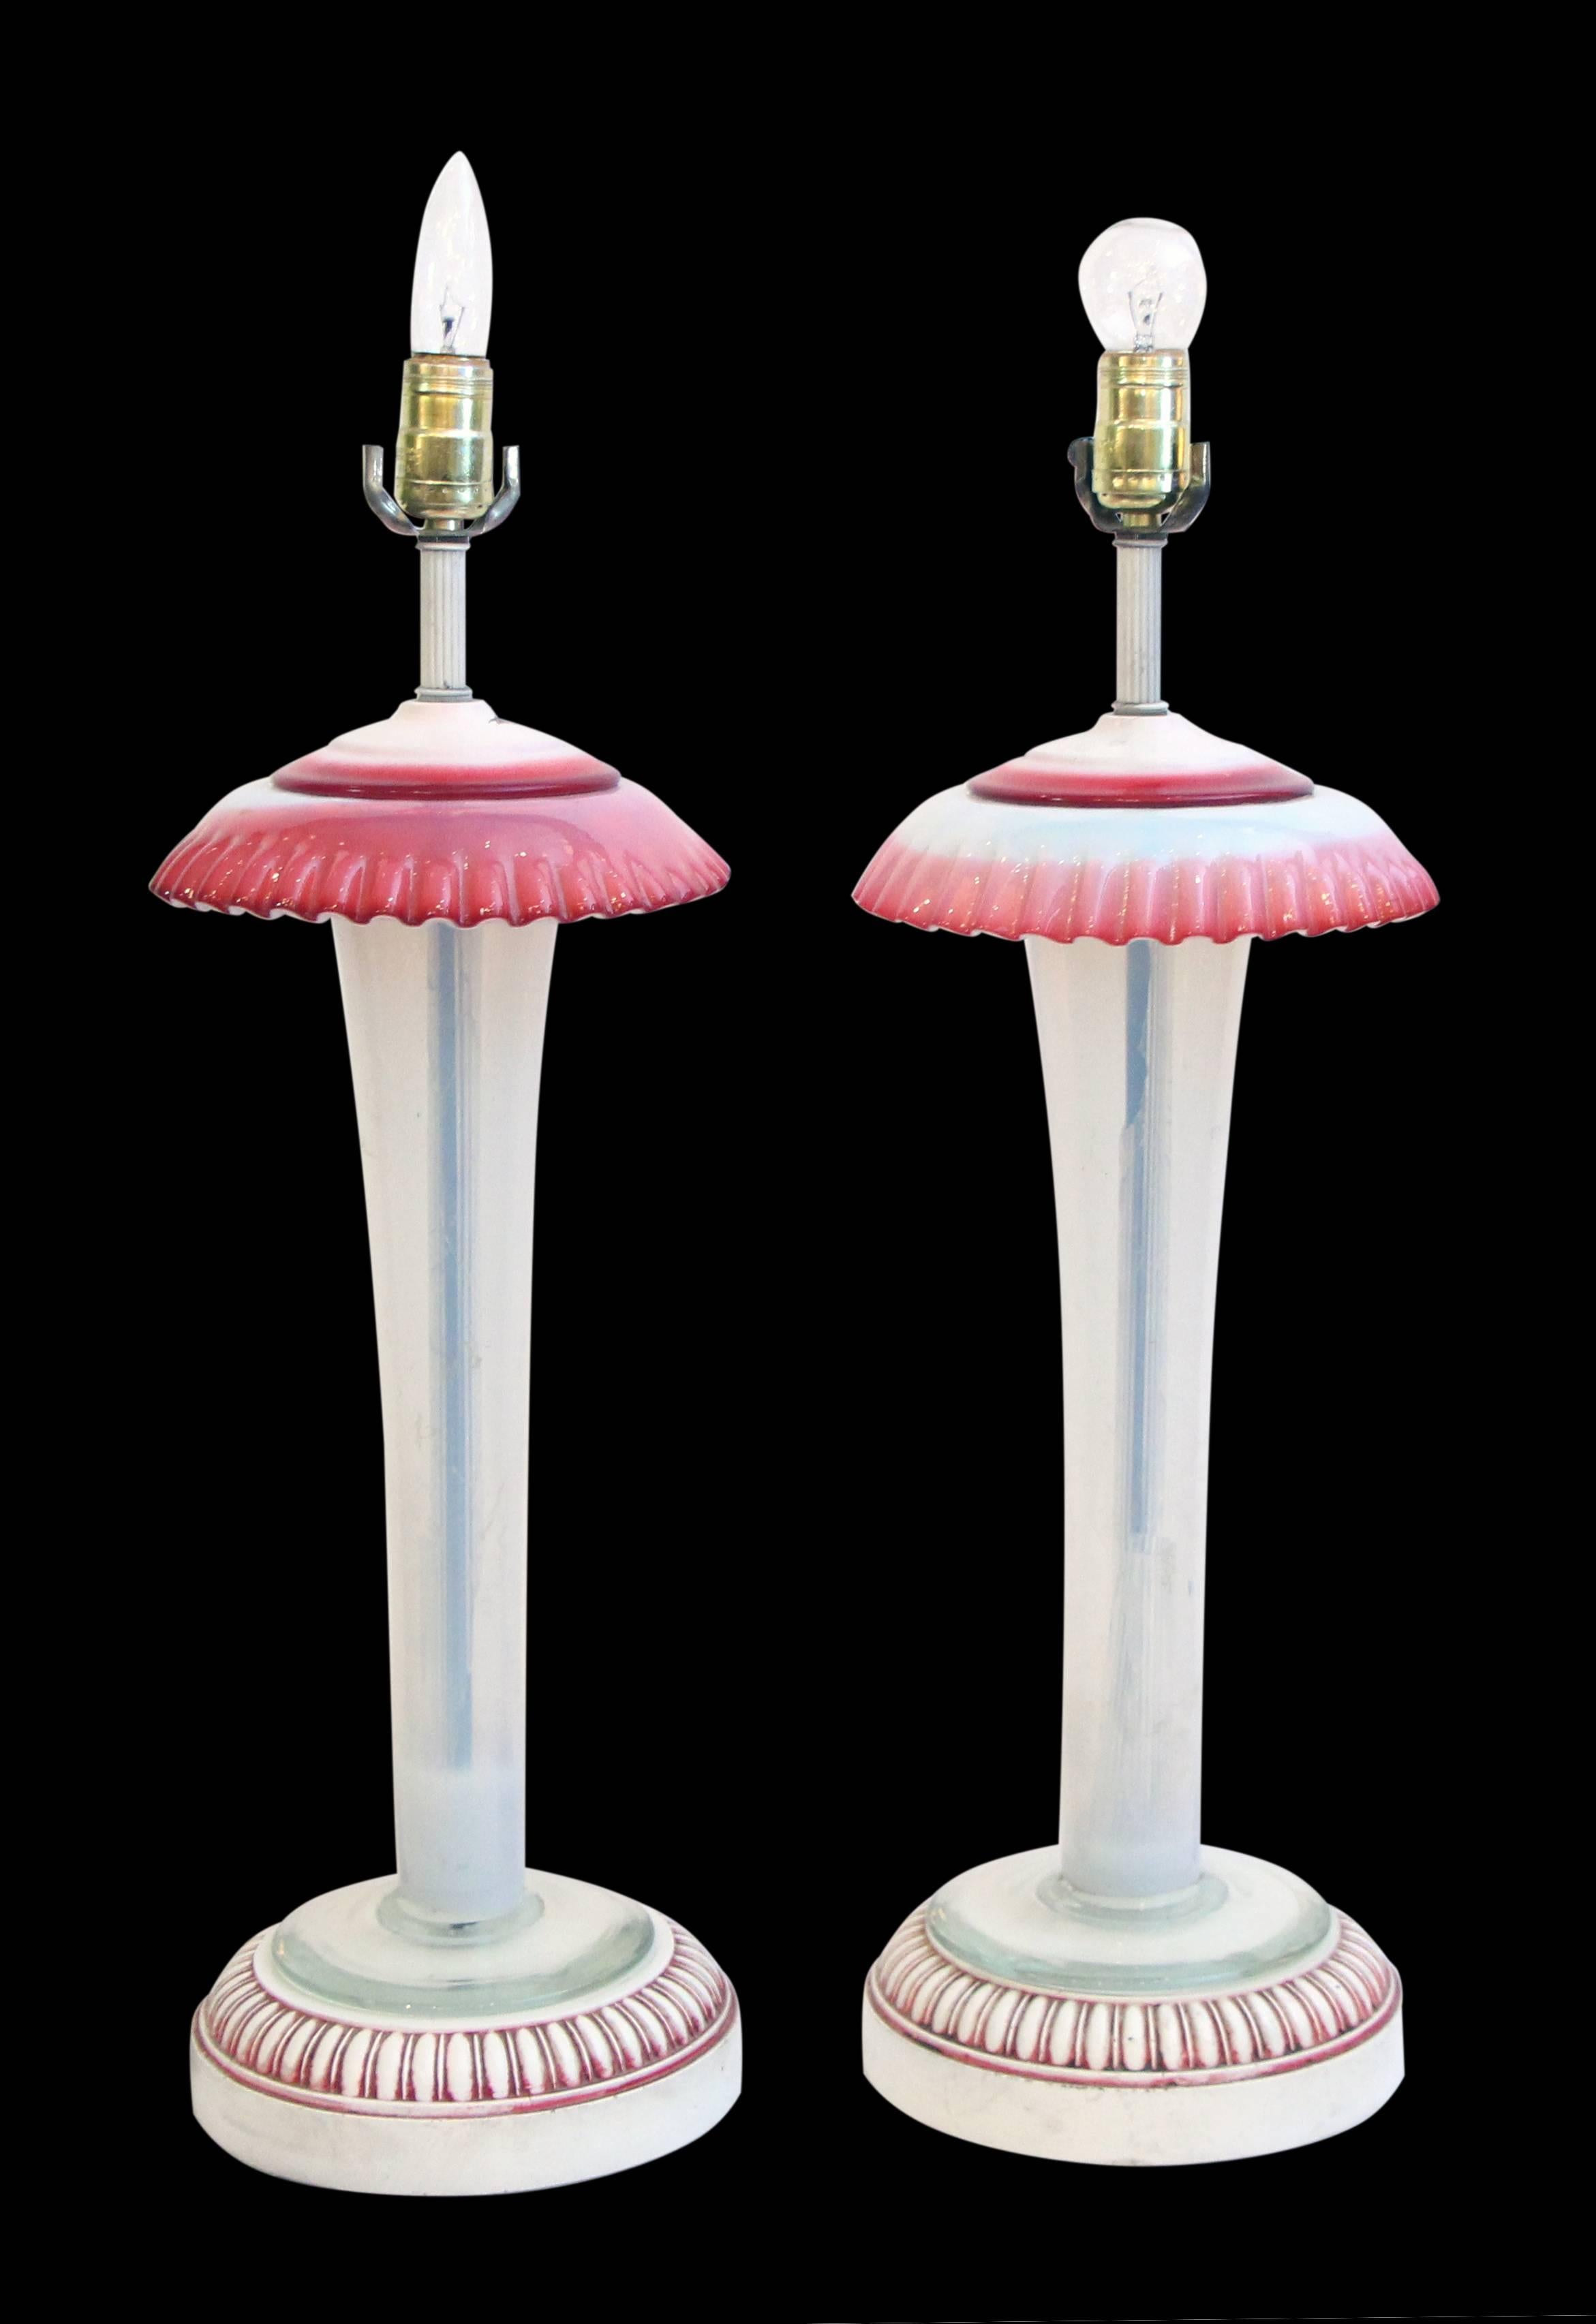 Murano white and red opaline glass table lamps. Priced as a pair.